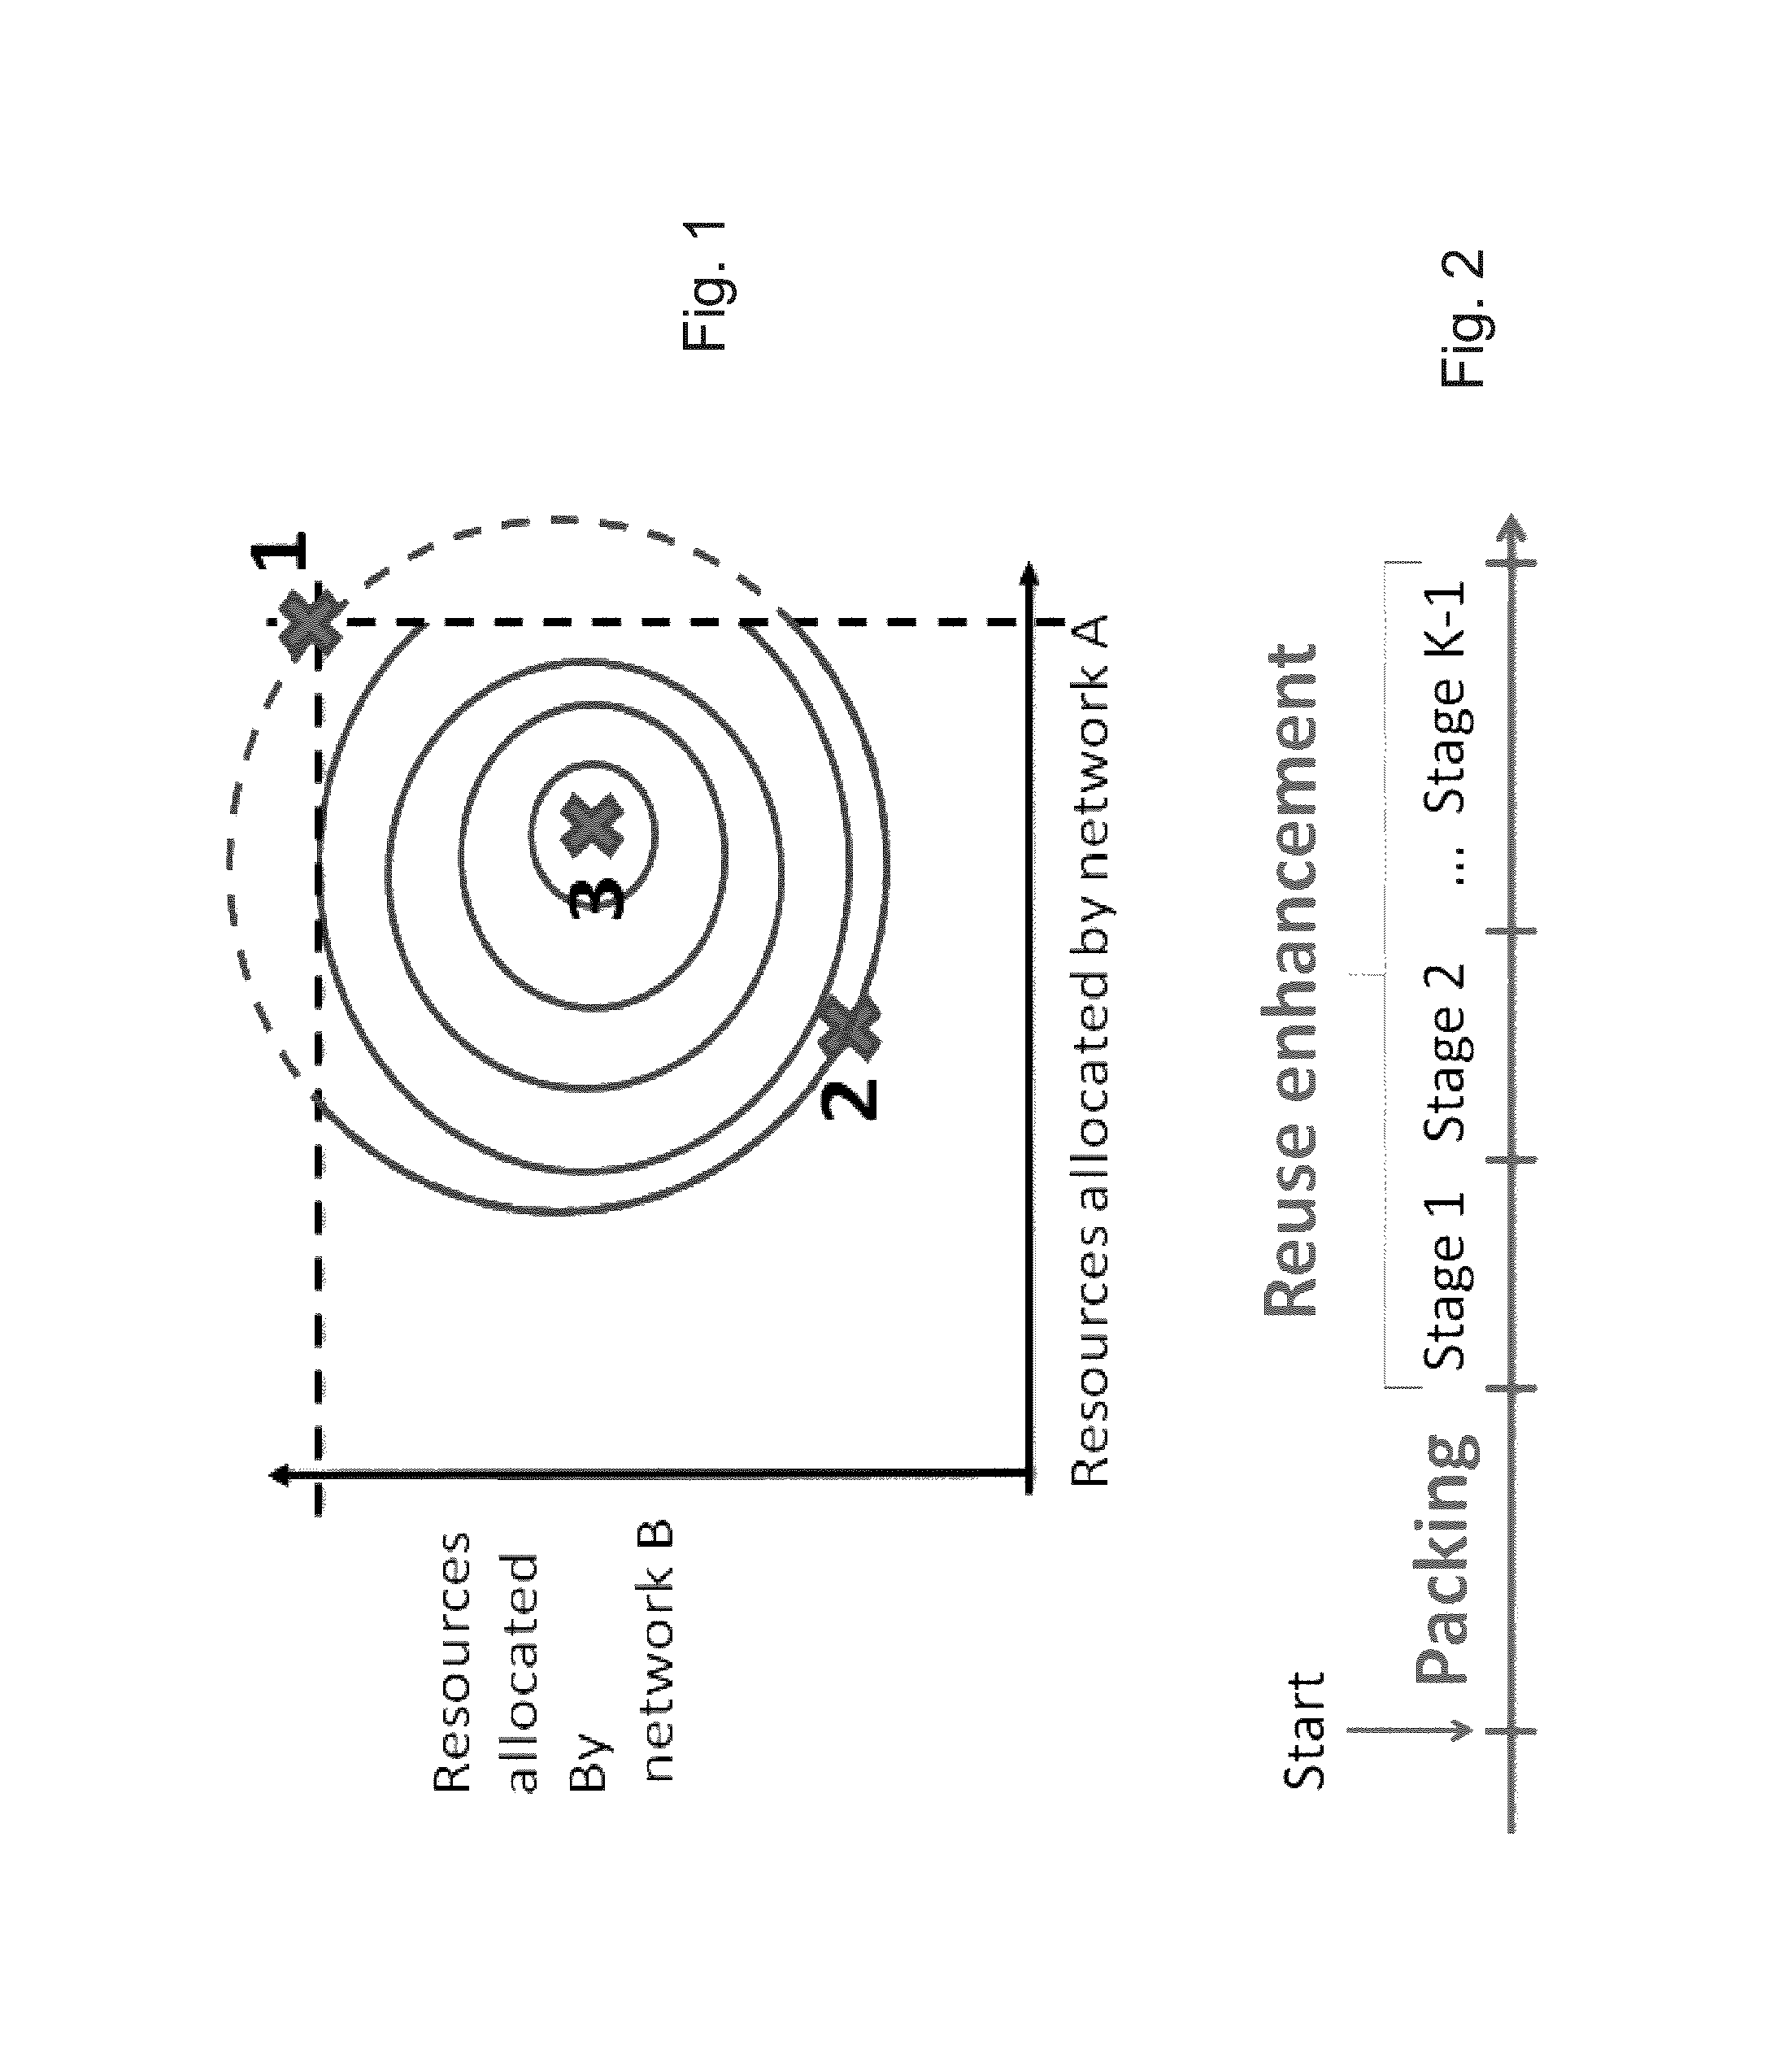 Efficient co-existence method for dynamic spectrum sharing